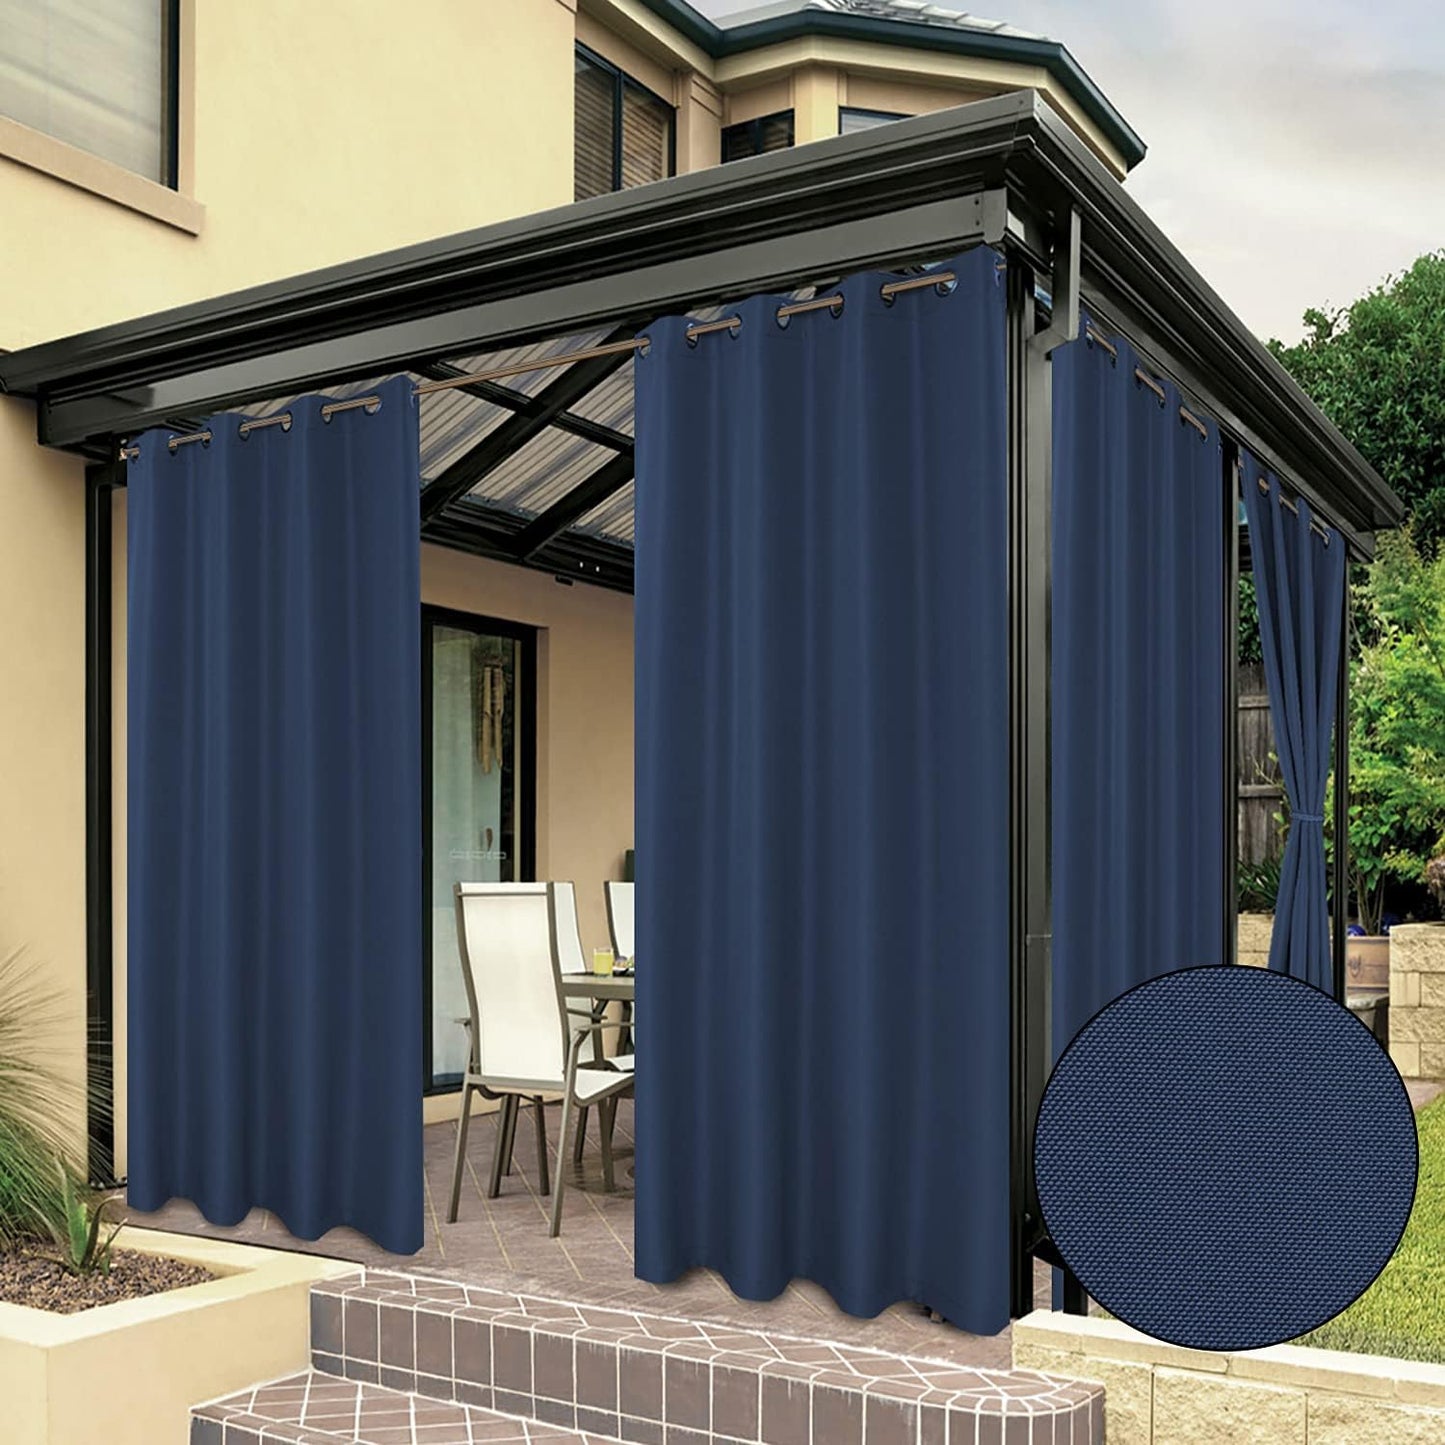 BONZER Outdoor Curtains for Patio Waterproof, Premium Thick Privacy Weatherproof Grommet outside Curtains for Porch, Gazebo, Deck, 1 Panel, 54W X 84L Inch, White  BONZER Navy 54W X 95L Inch 